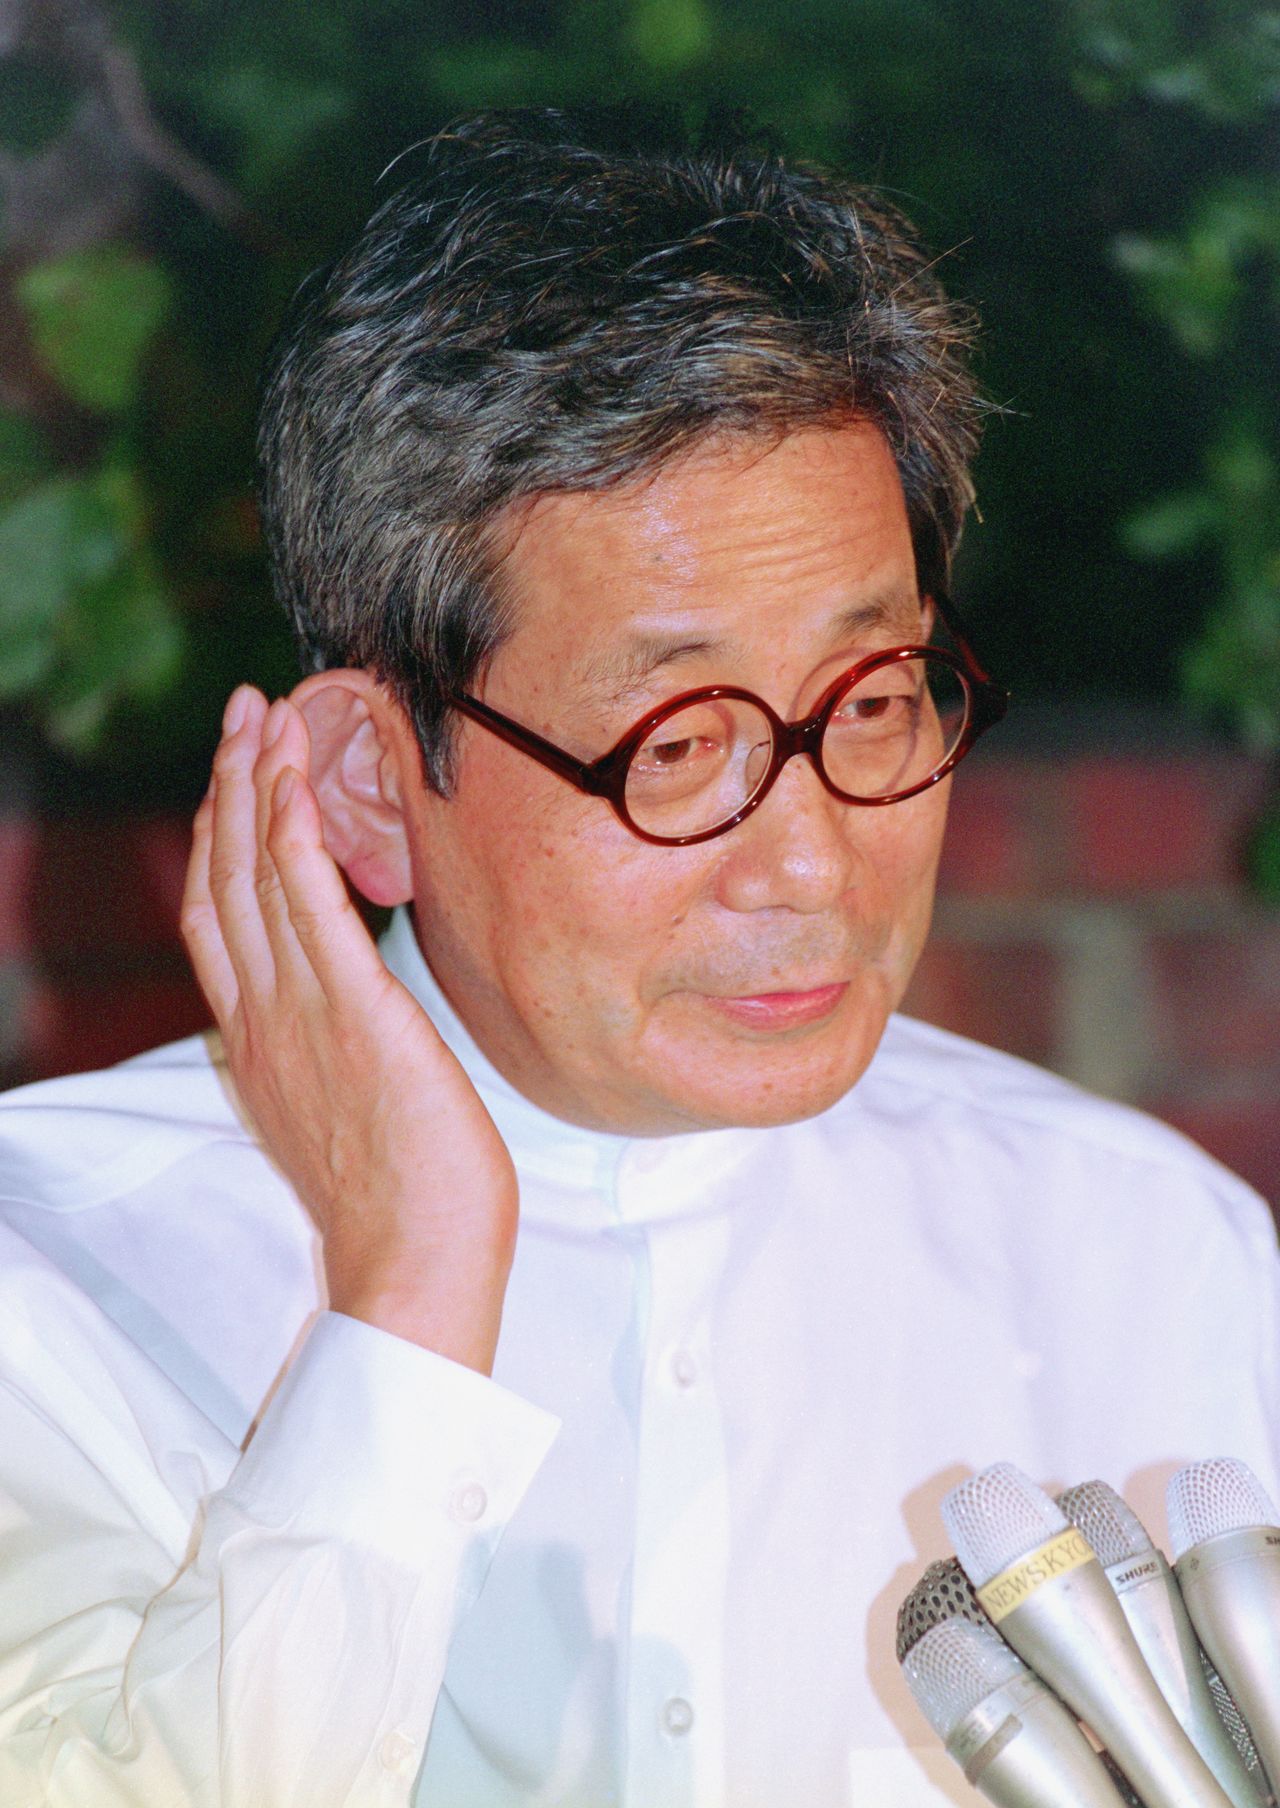 Ōe Kenzaburō speaks to reporters outside his house after winning the Nobel Prize in Literature on October 13, 1994. (© Jiji)